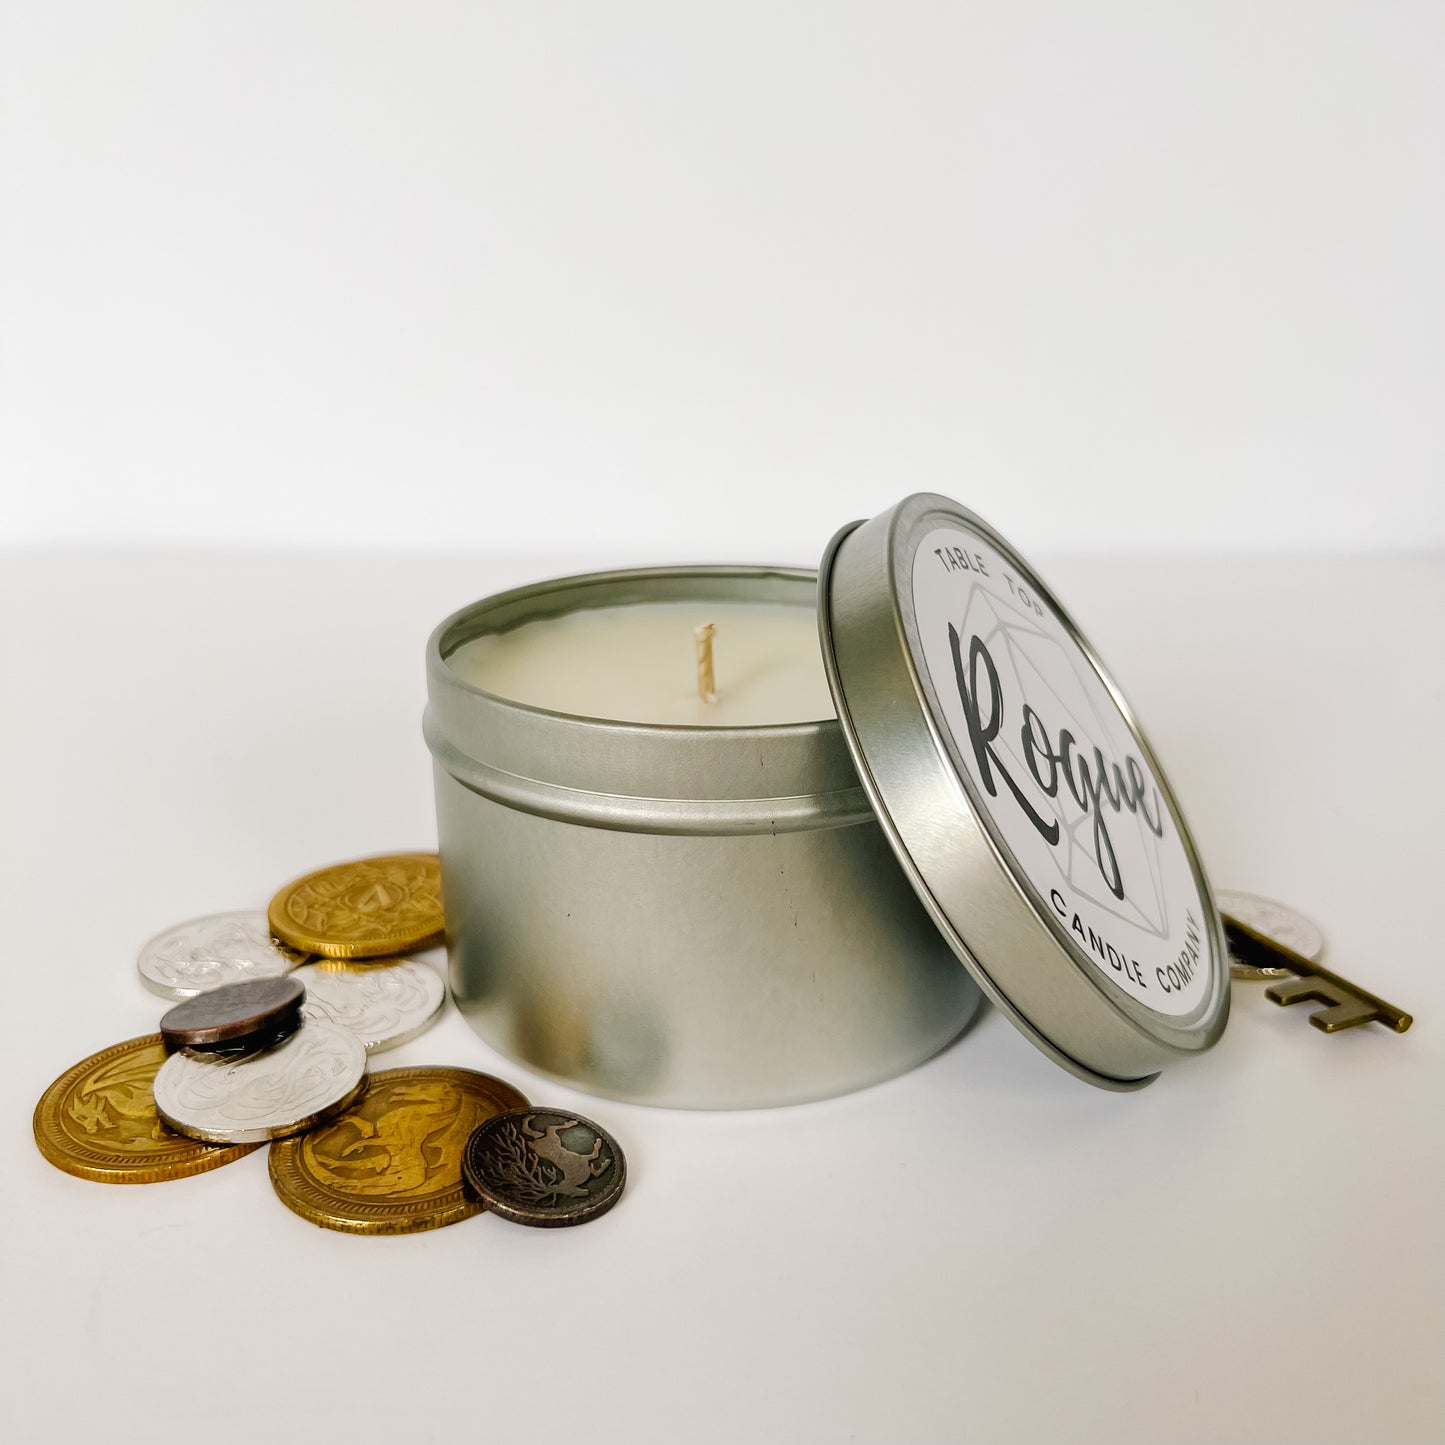 Our 8 ounce candle. In our Rogue scent. It is surrounded by coins and a key